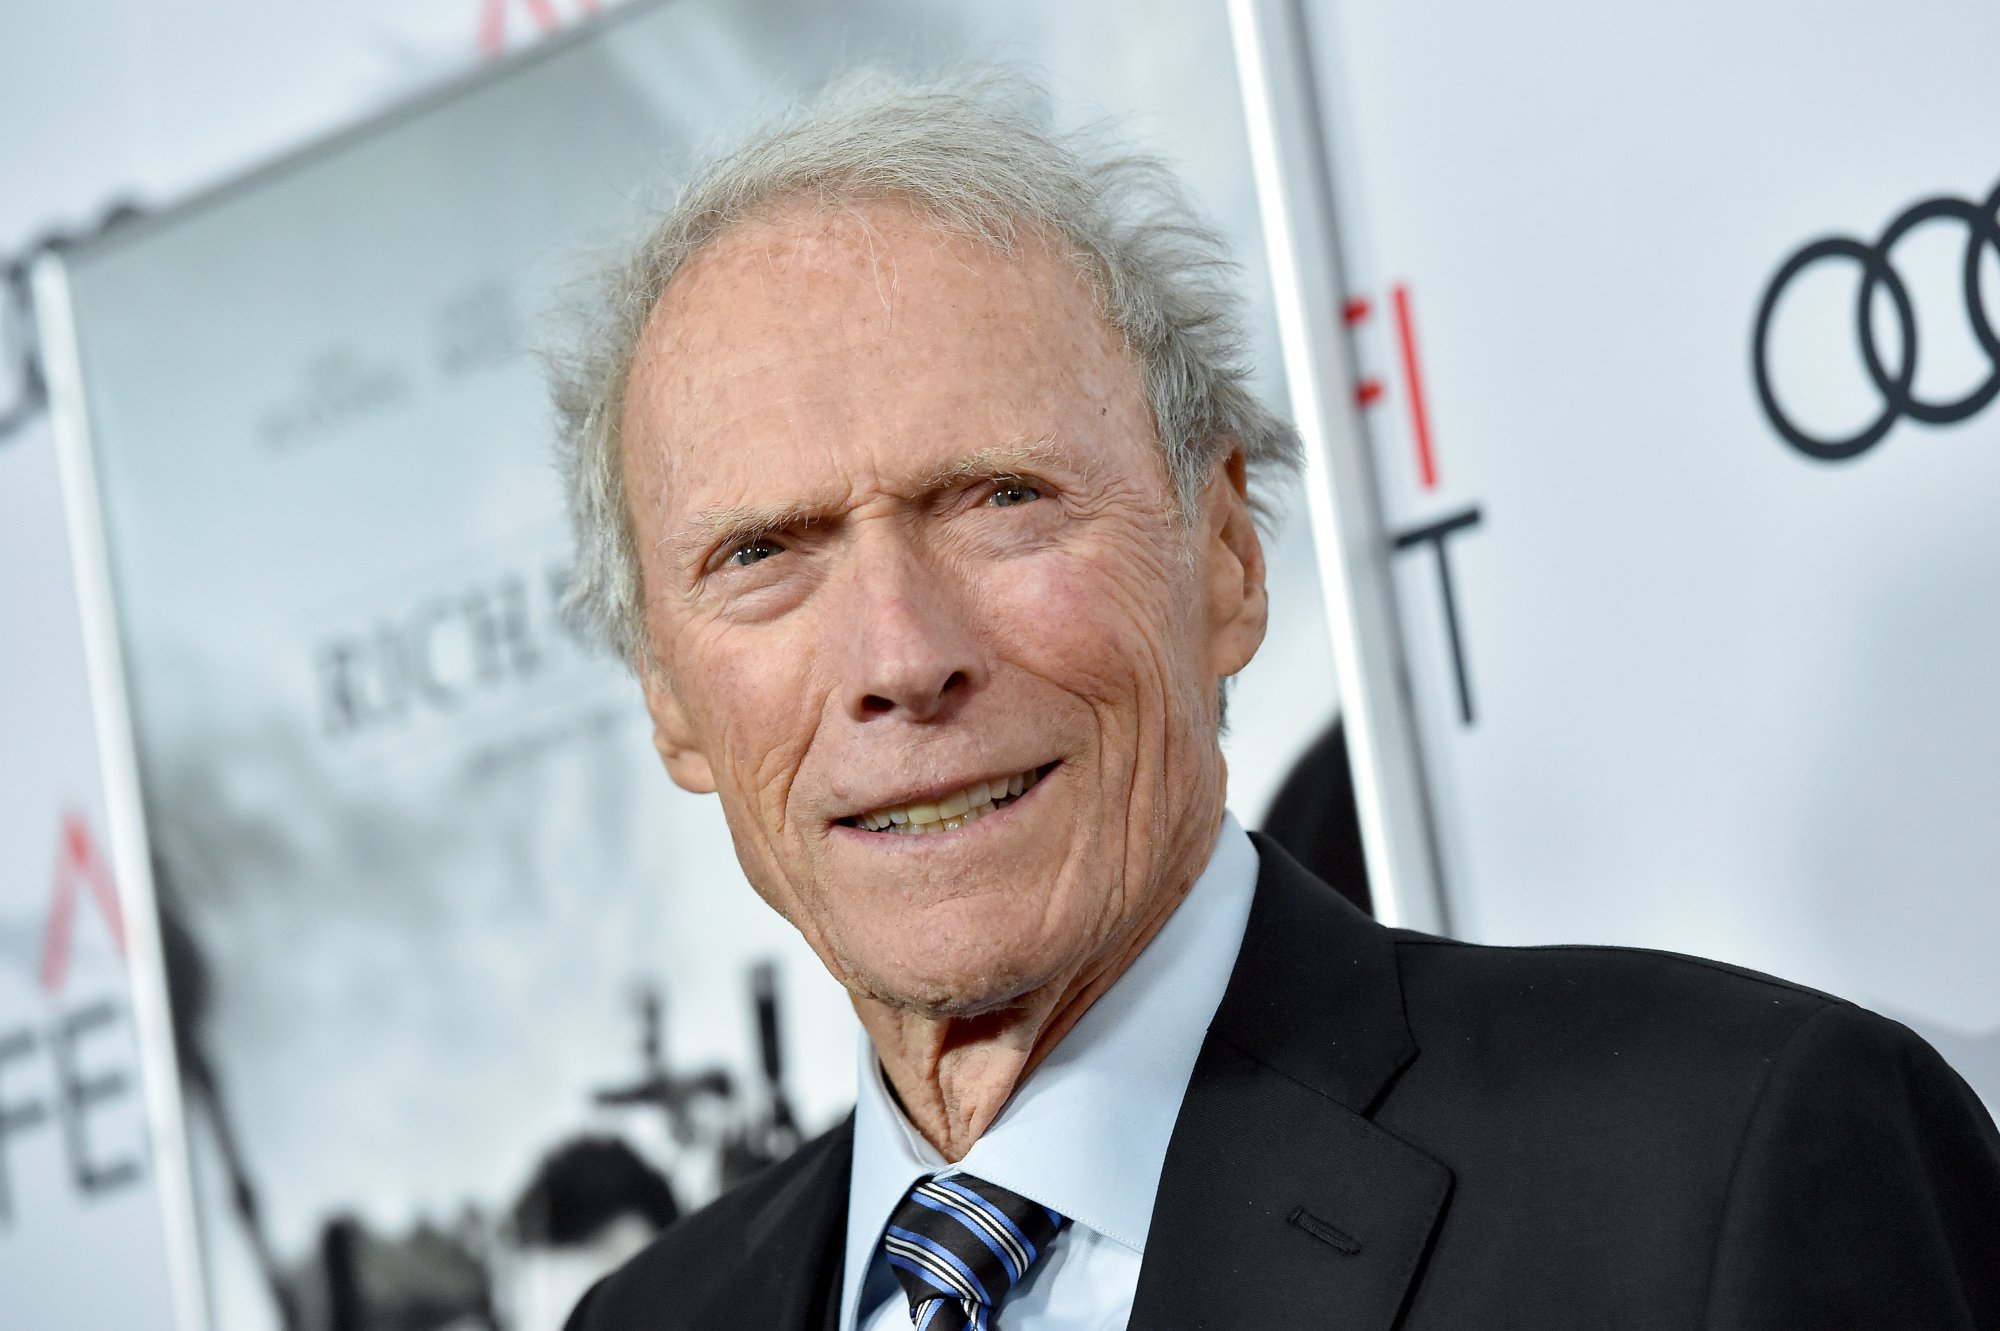 Clint Eastwood in article about new generation smiling in front of AFI Fest step and repeat